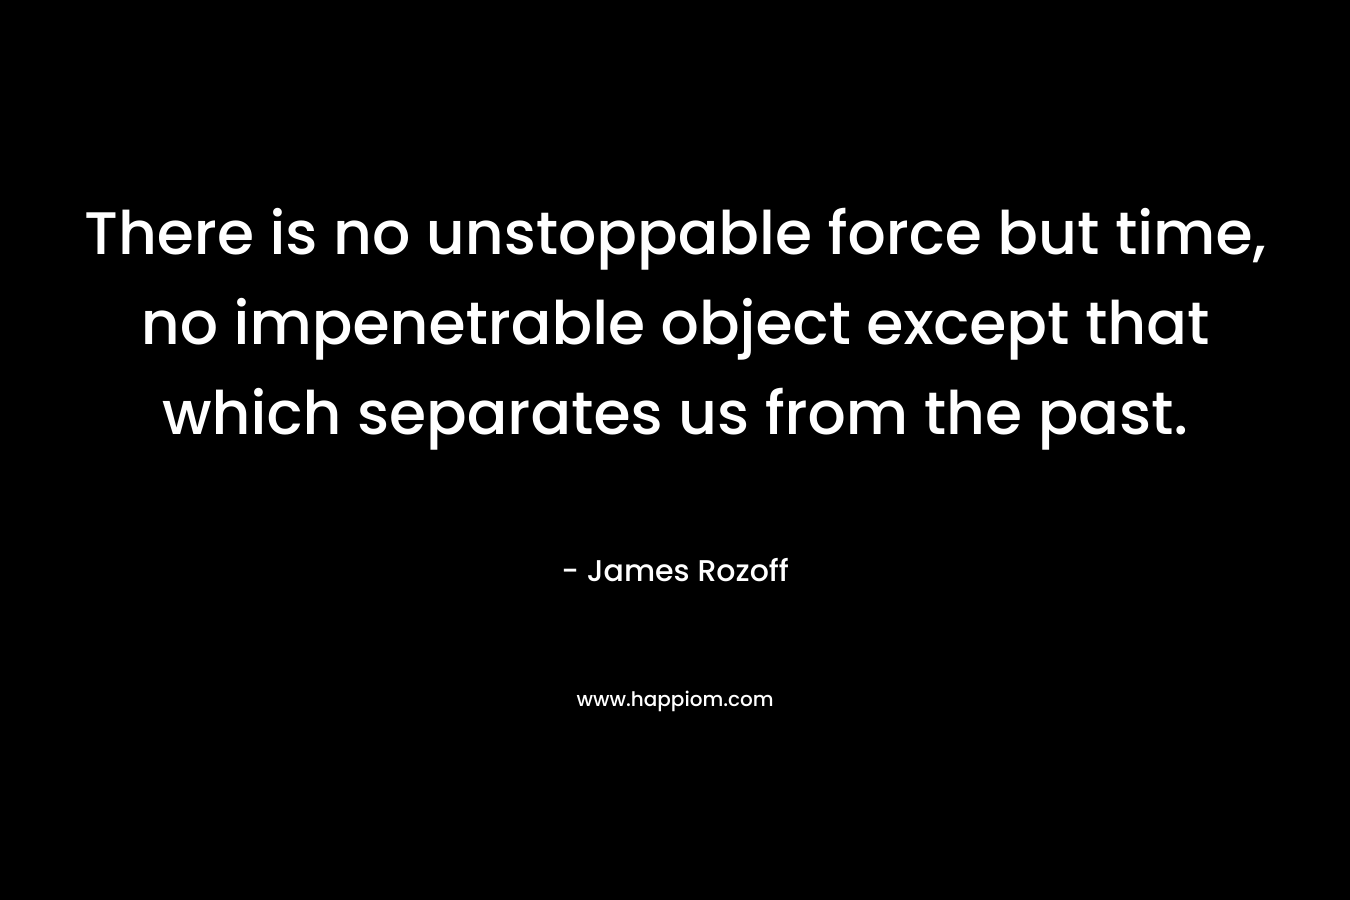 There is no unstoppable force but time, no impenetrable object except that which separates us from the past.